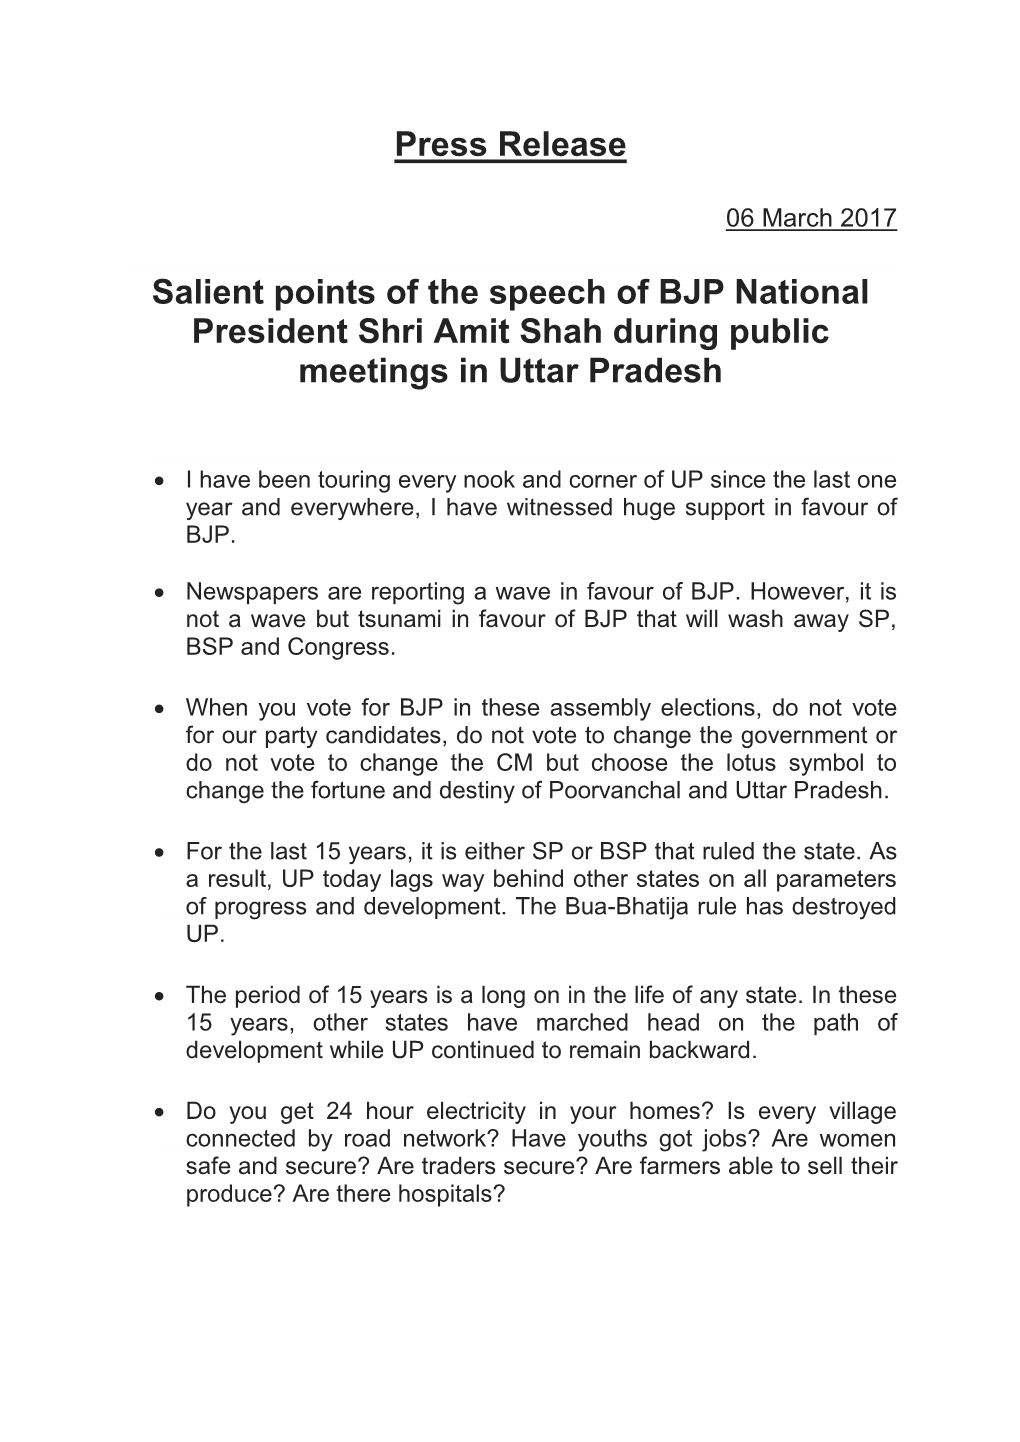 Press Release Salient Points of the Speech of BJP National President